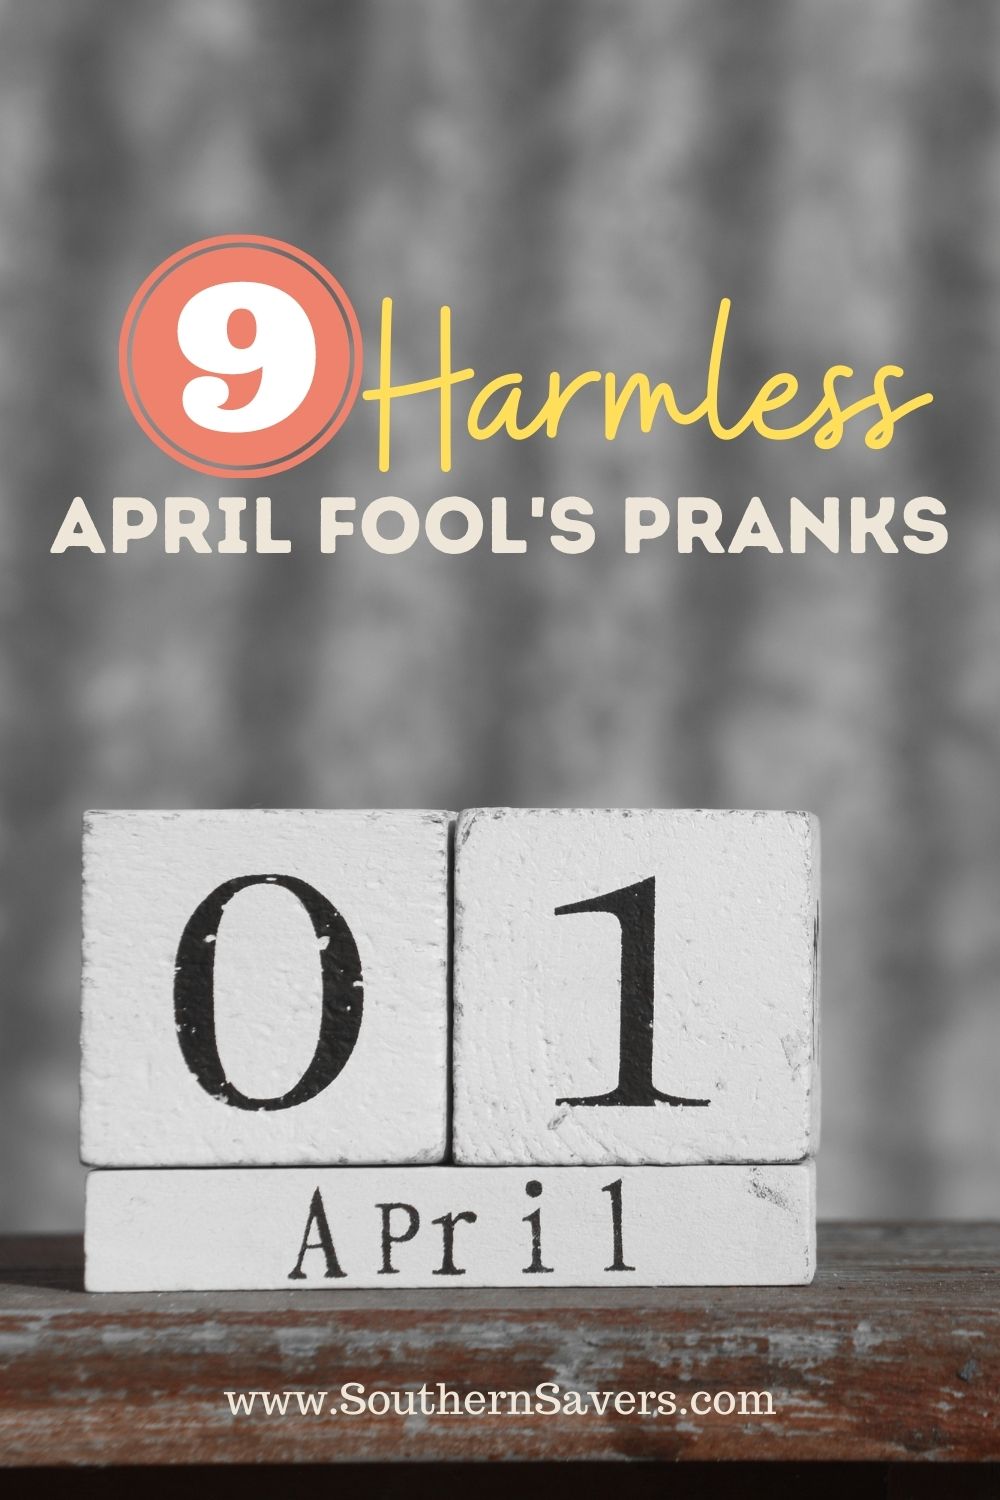 Celebrate April 1 without any long term harm with these 9 harmless April Fool's Pranks that are sure to make your spouse or coworker chuckle.